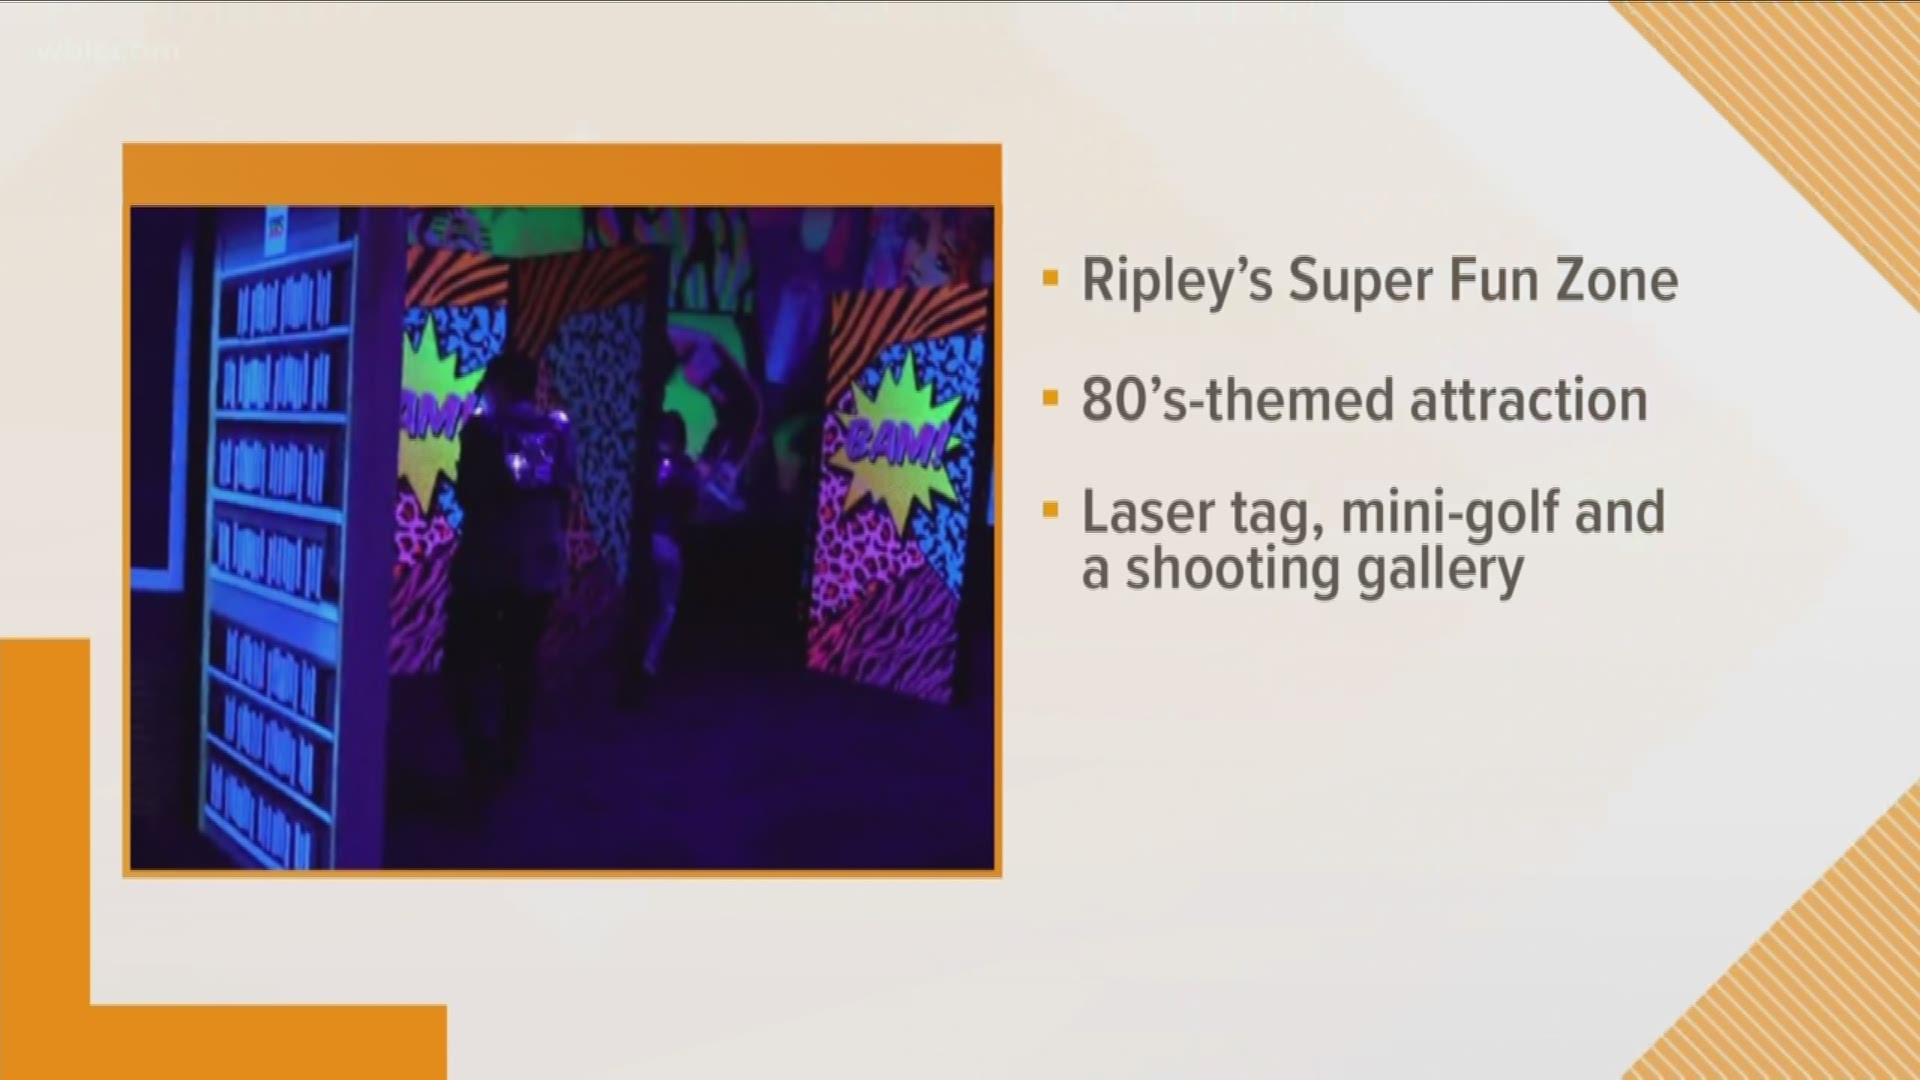 The Super Fun Zone will have you reliving the 80s with laser tag, mini-golf, and a shooting gallery.